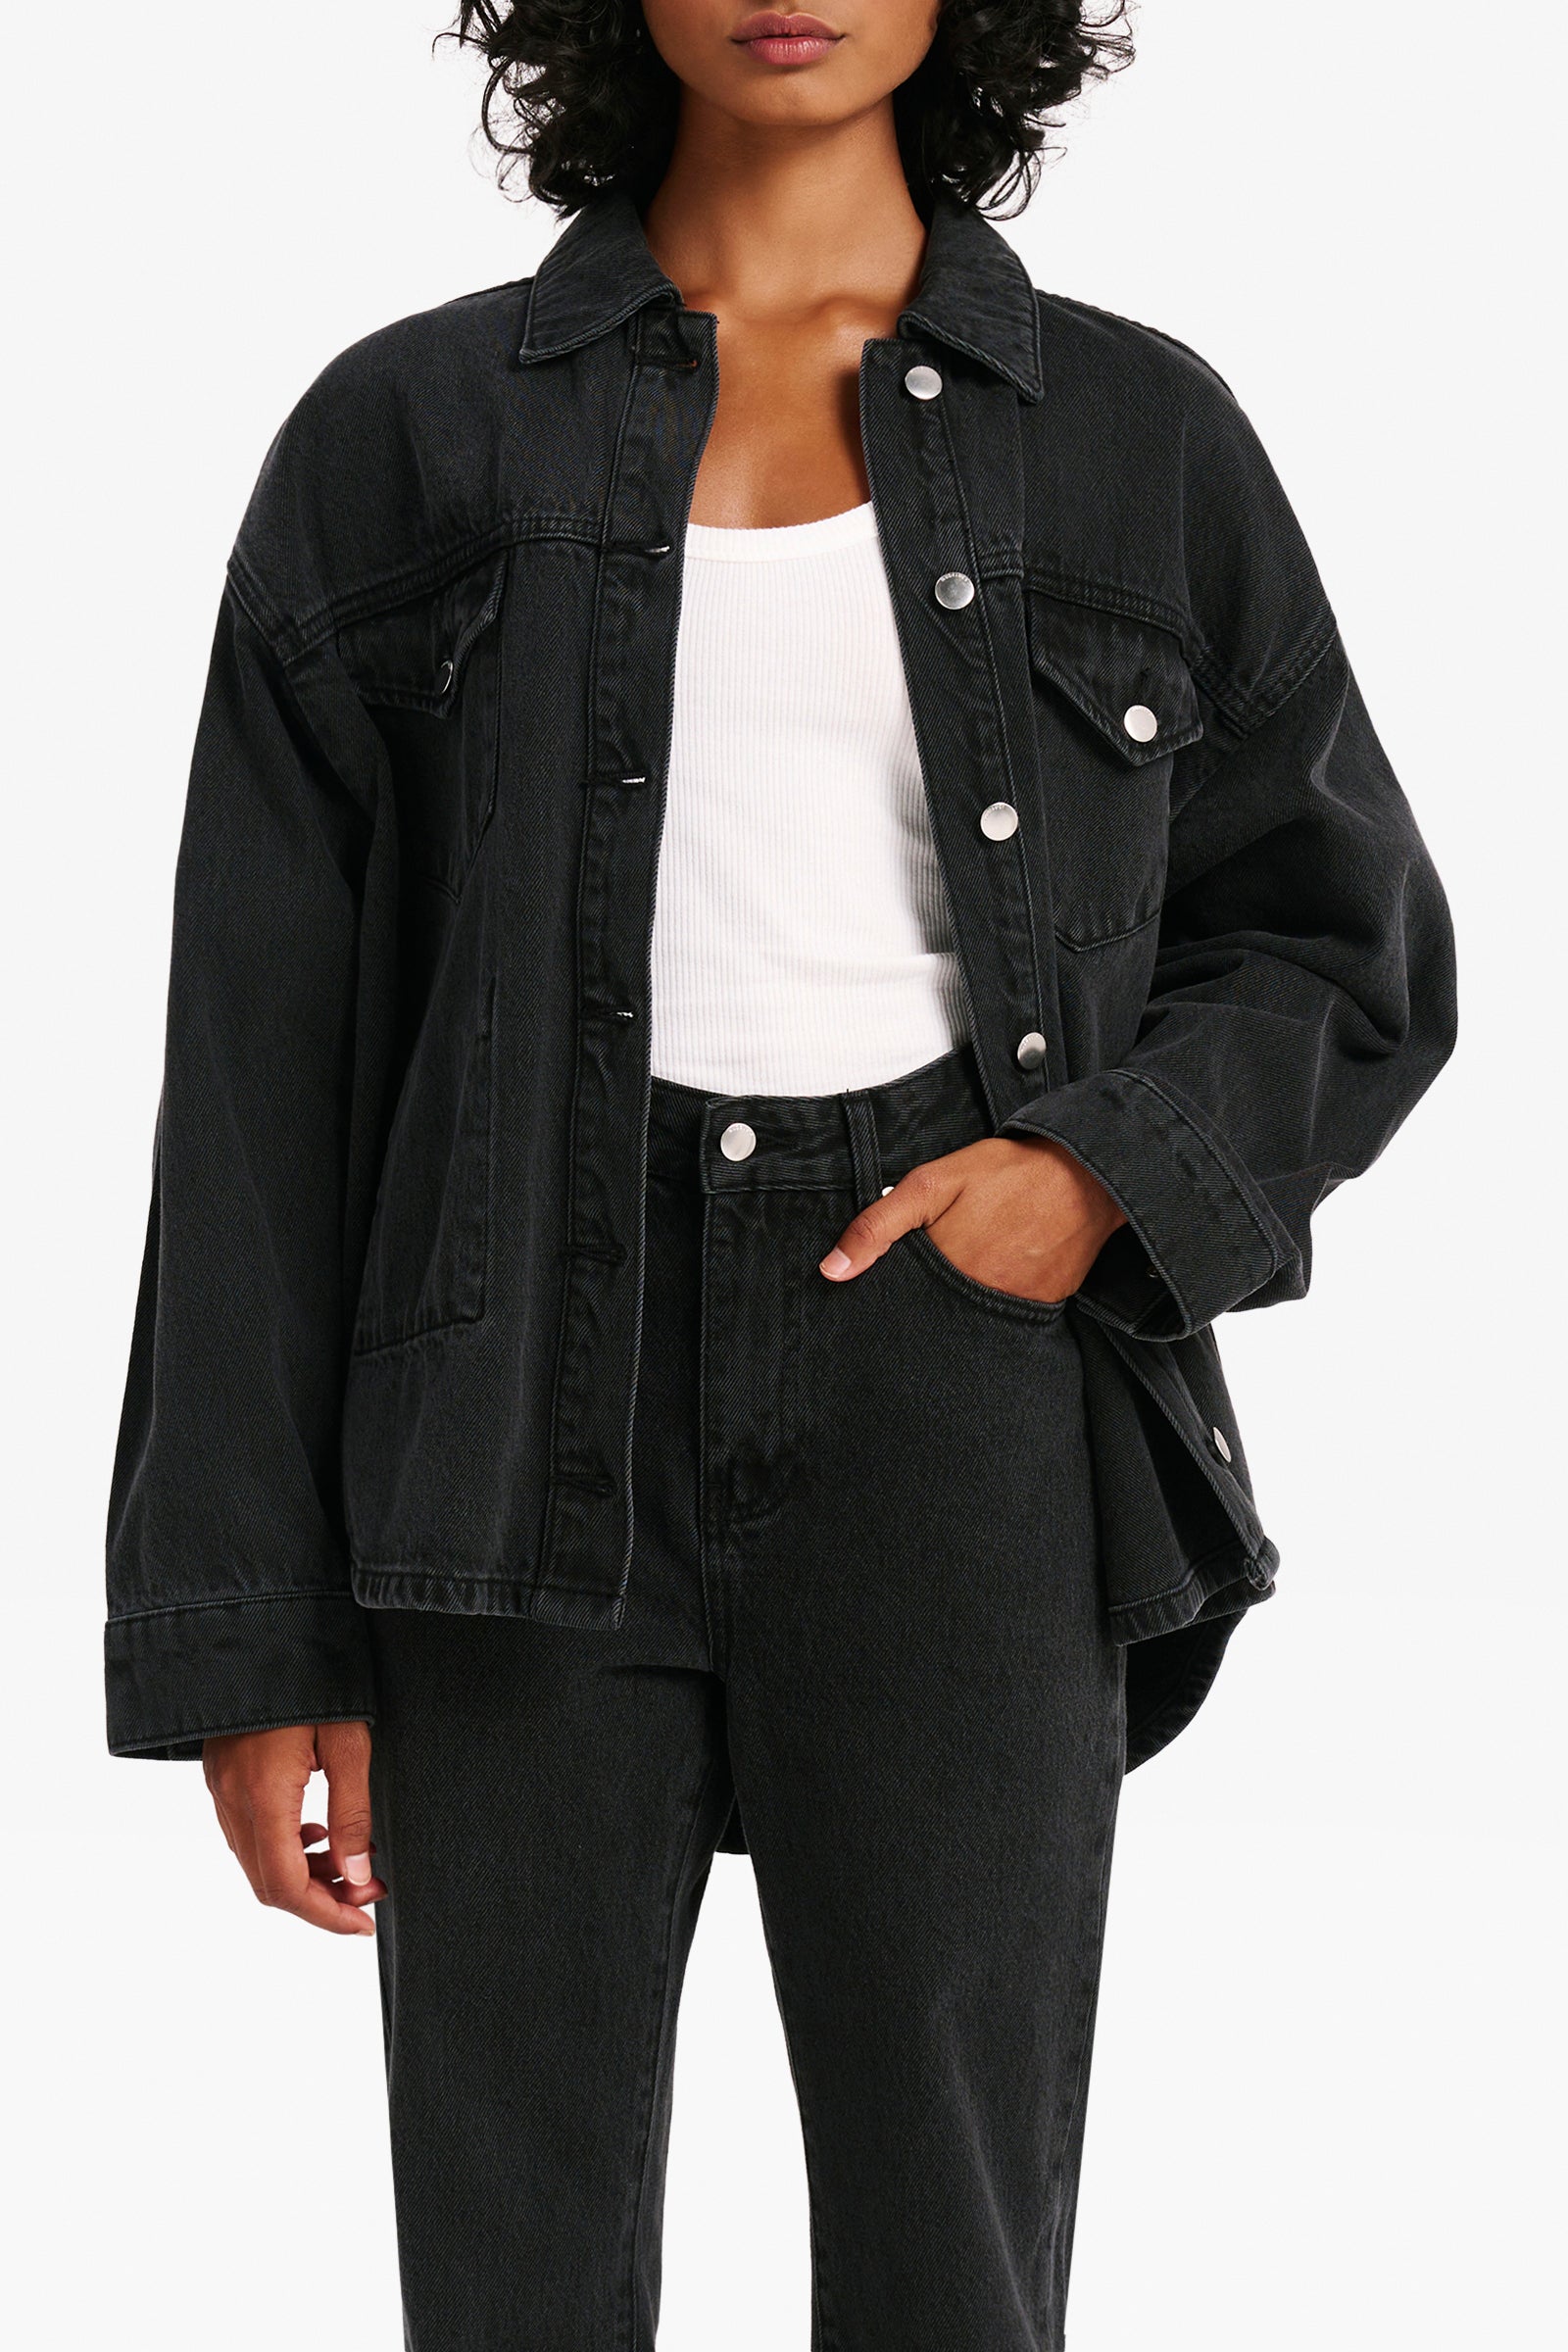 Nude Lucy Organic Denim Jacket Washed in Black